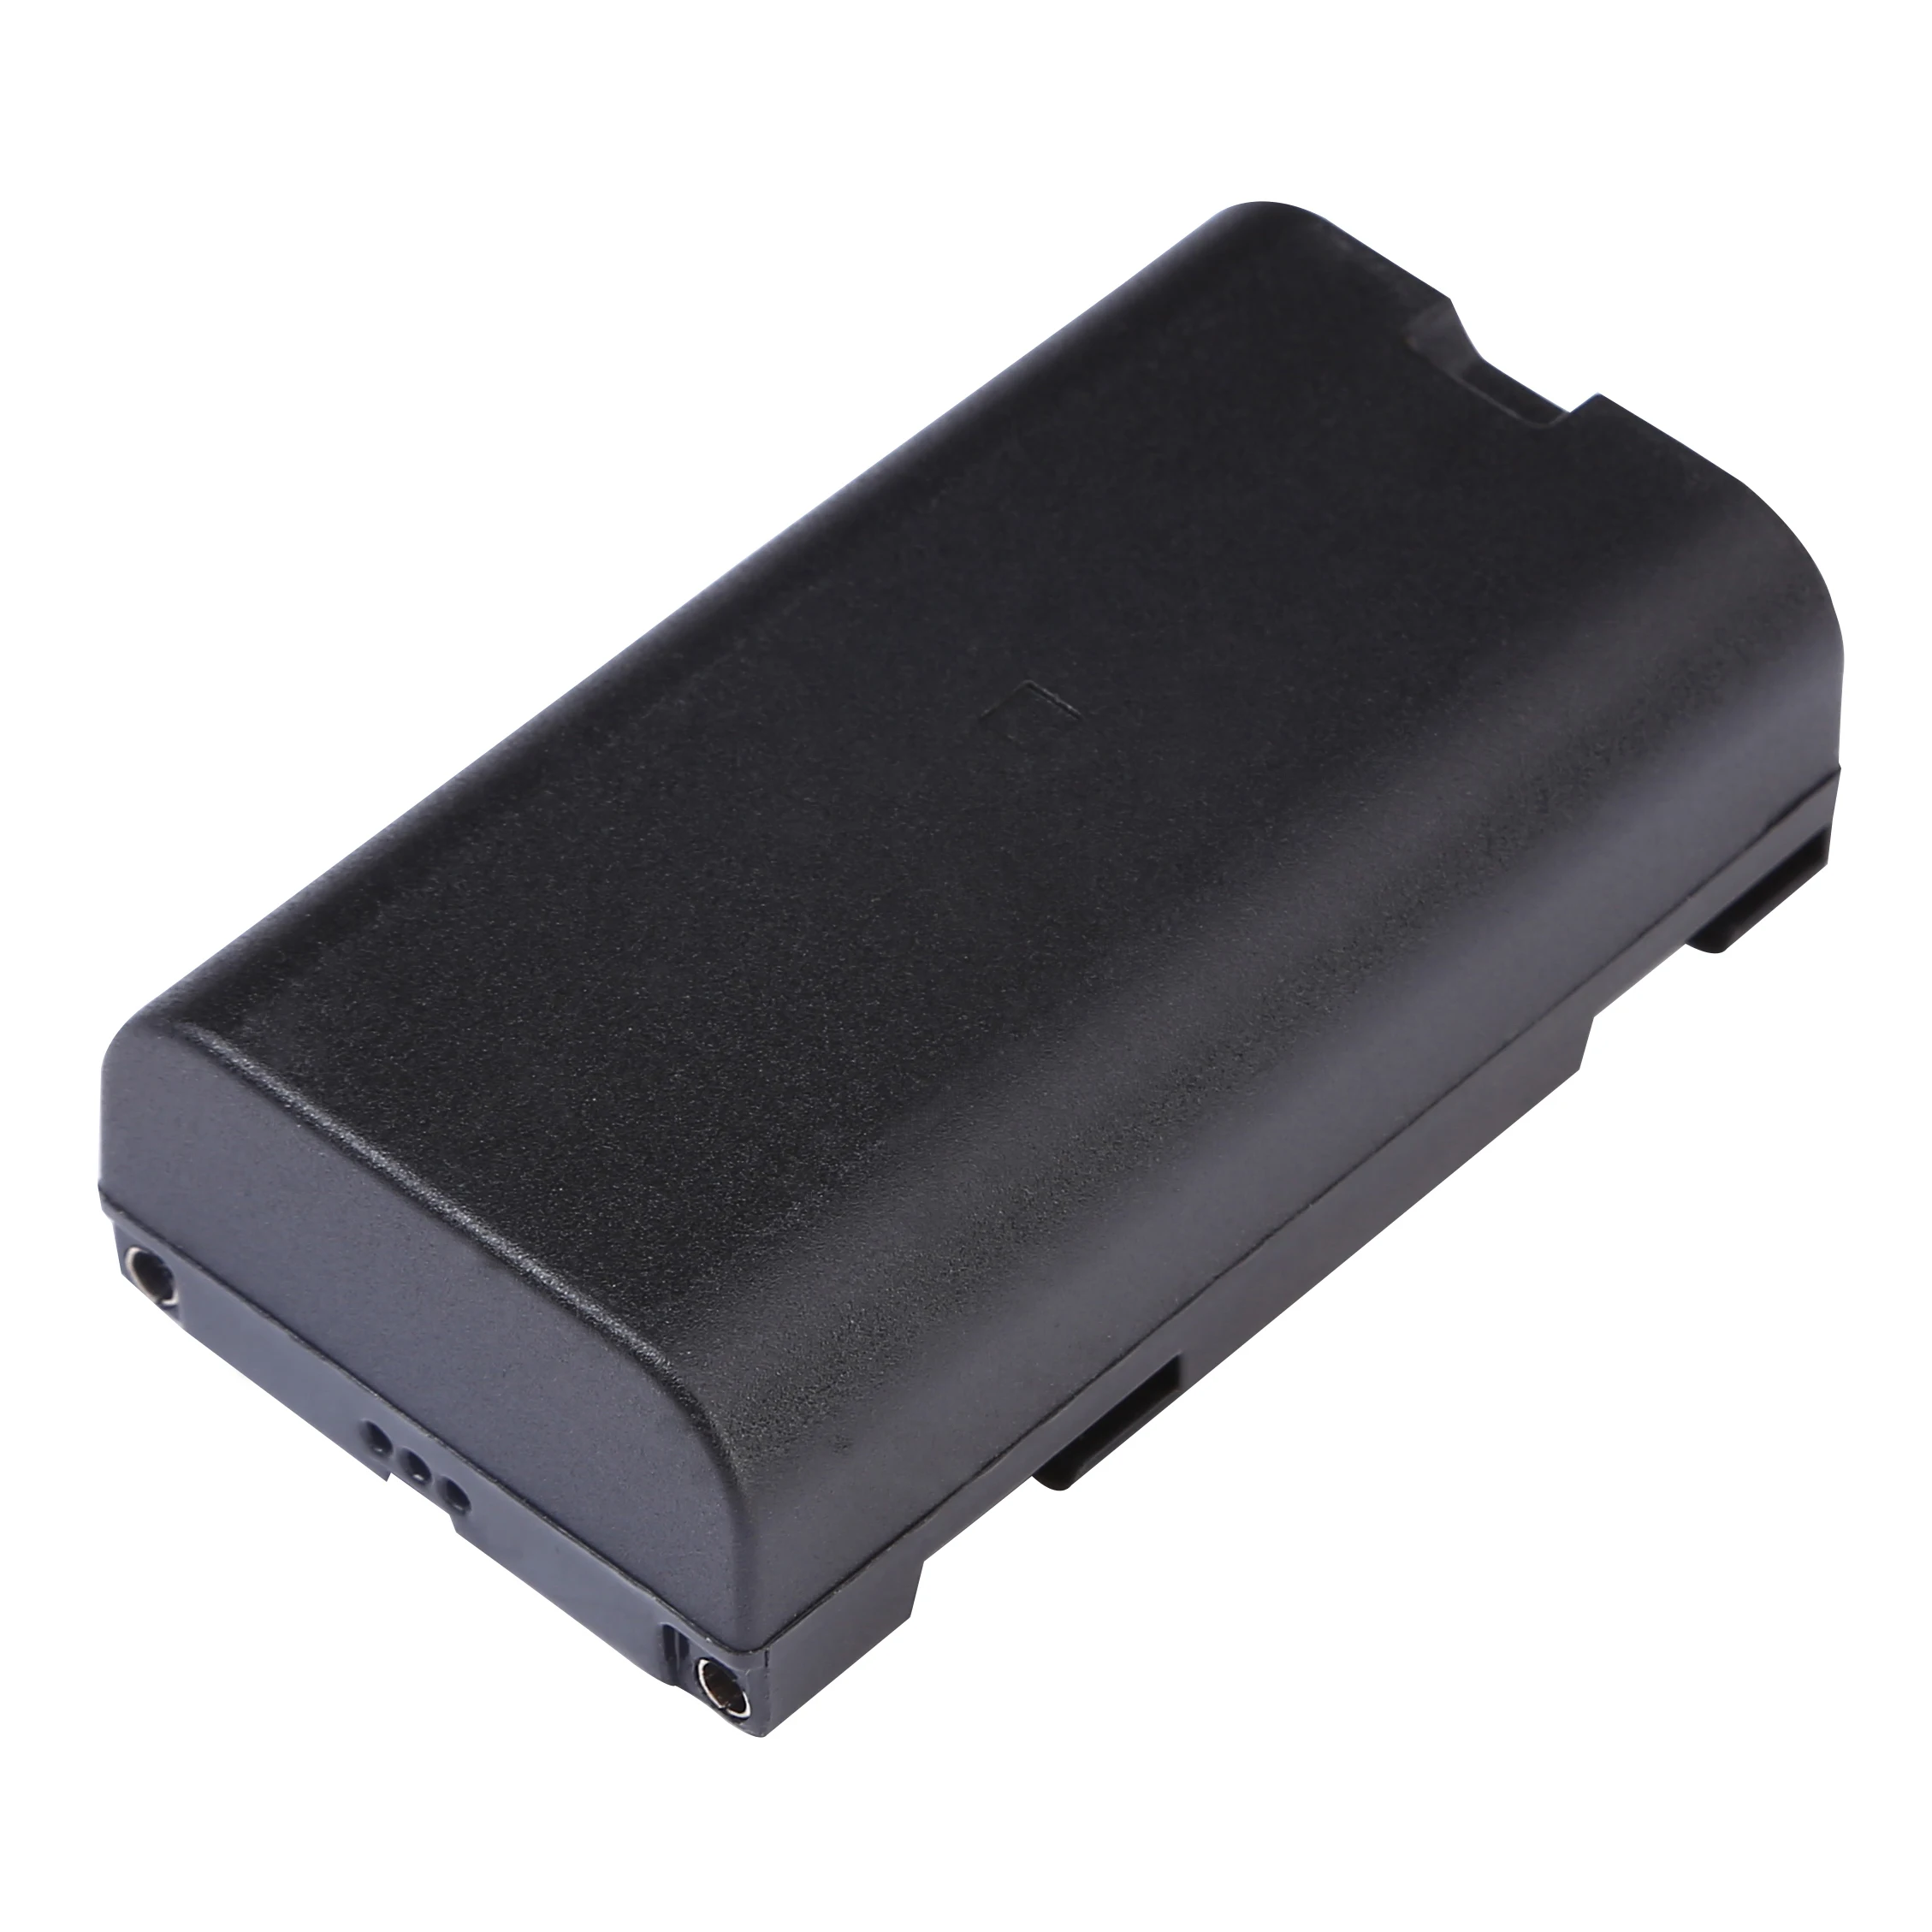 BDC46A BATTERY FOR SOKKIA TOTAL STATION SDL30 50 LEVEL,7380-46,40200040 